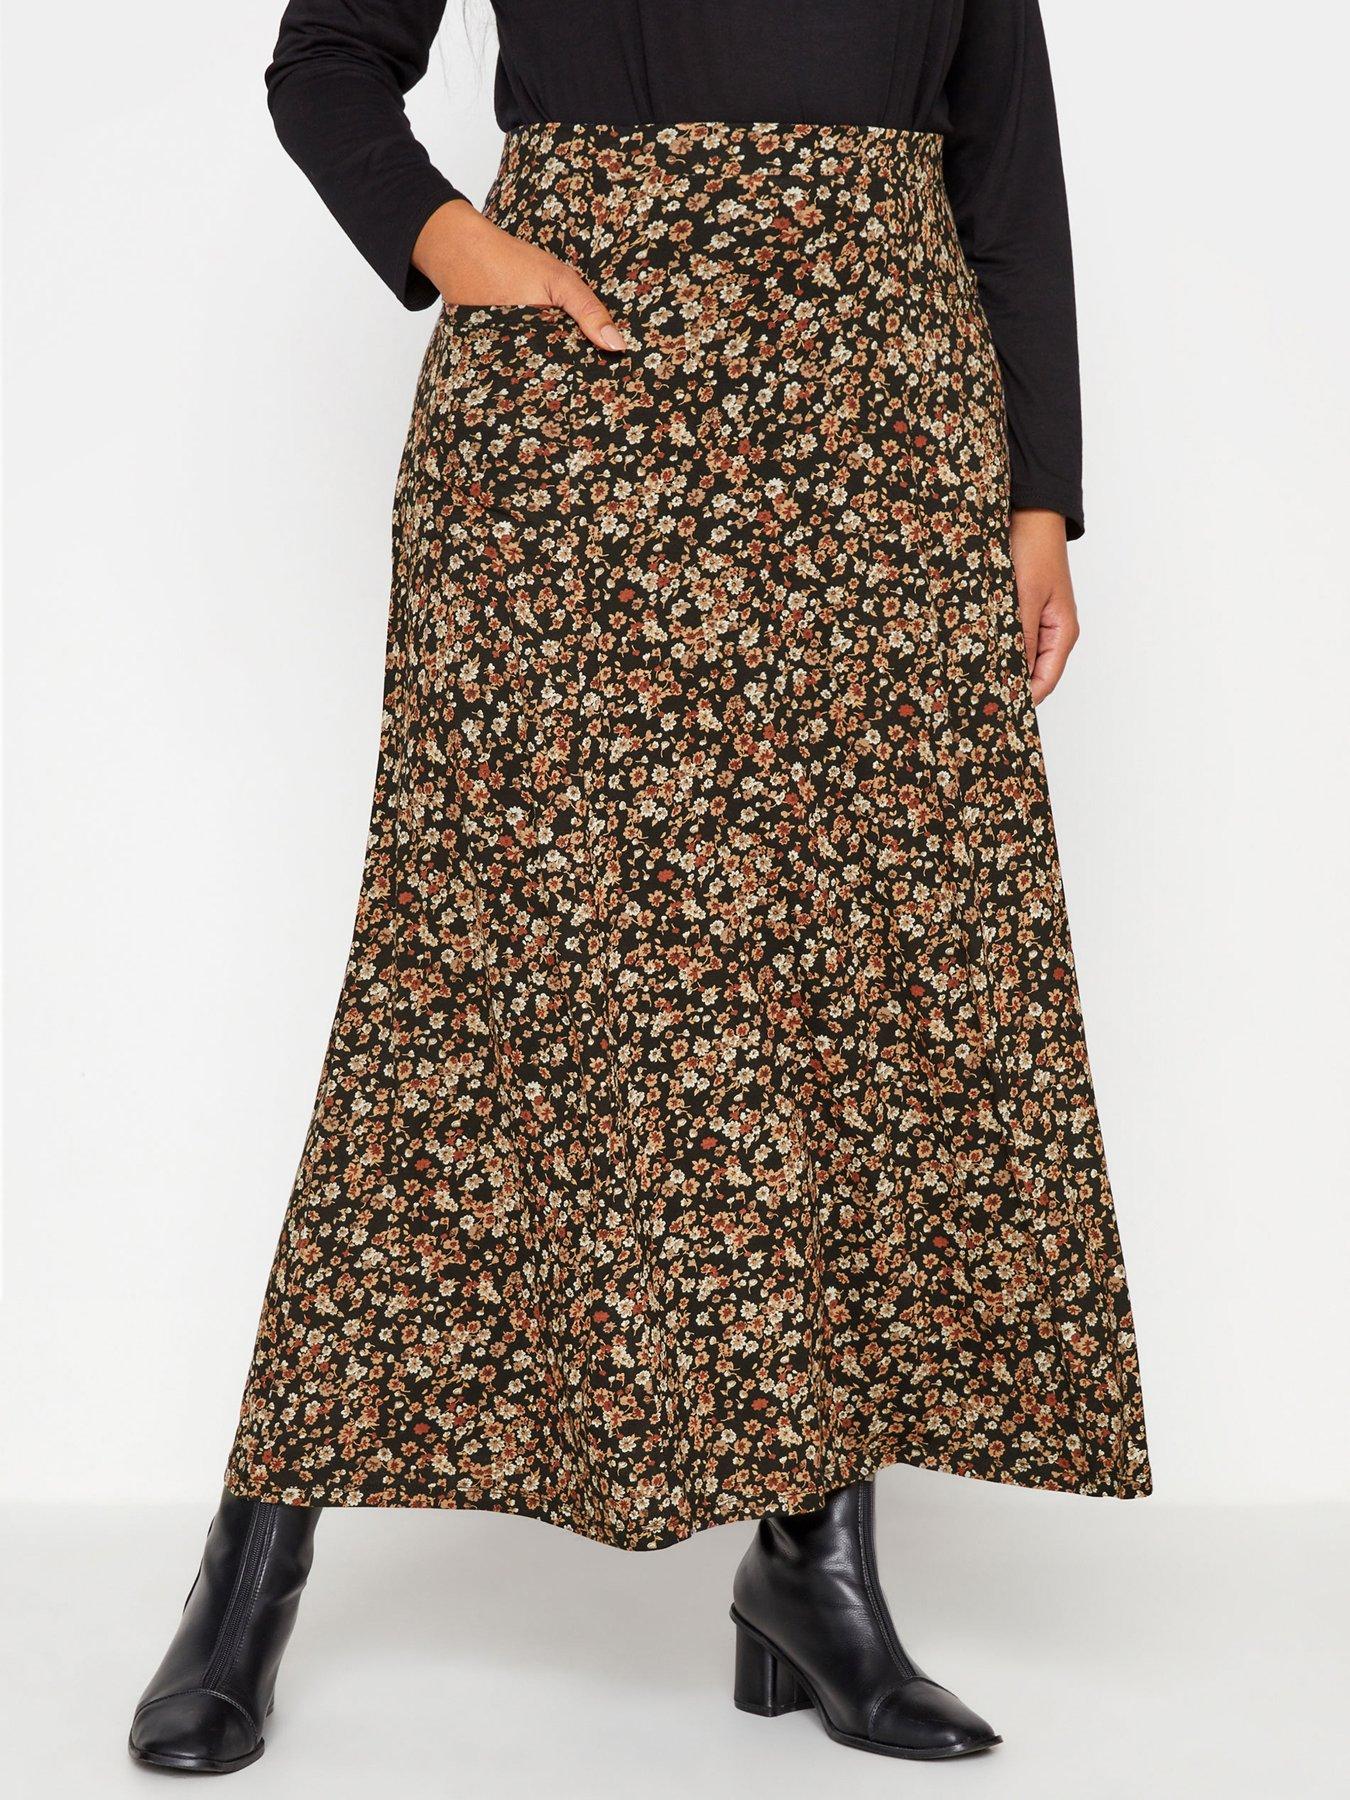  Clothing Ditsy Floral Print Skirt